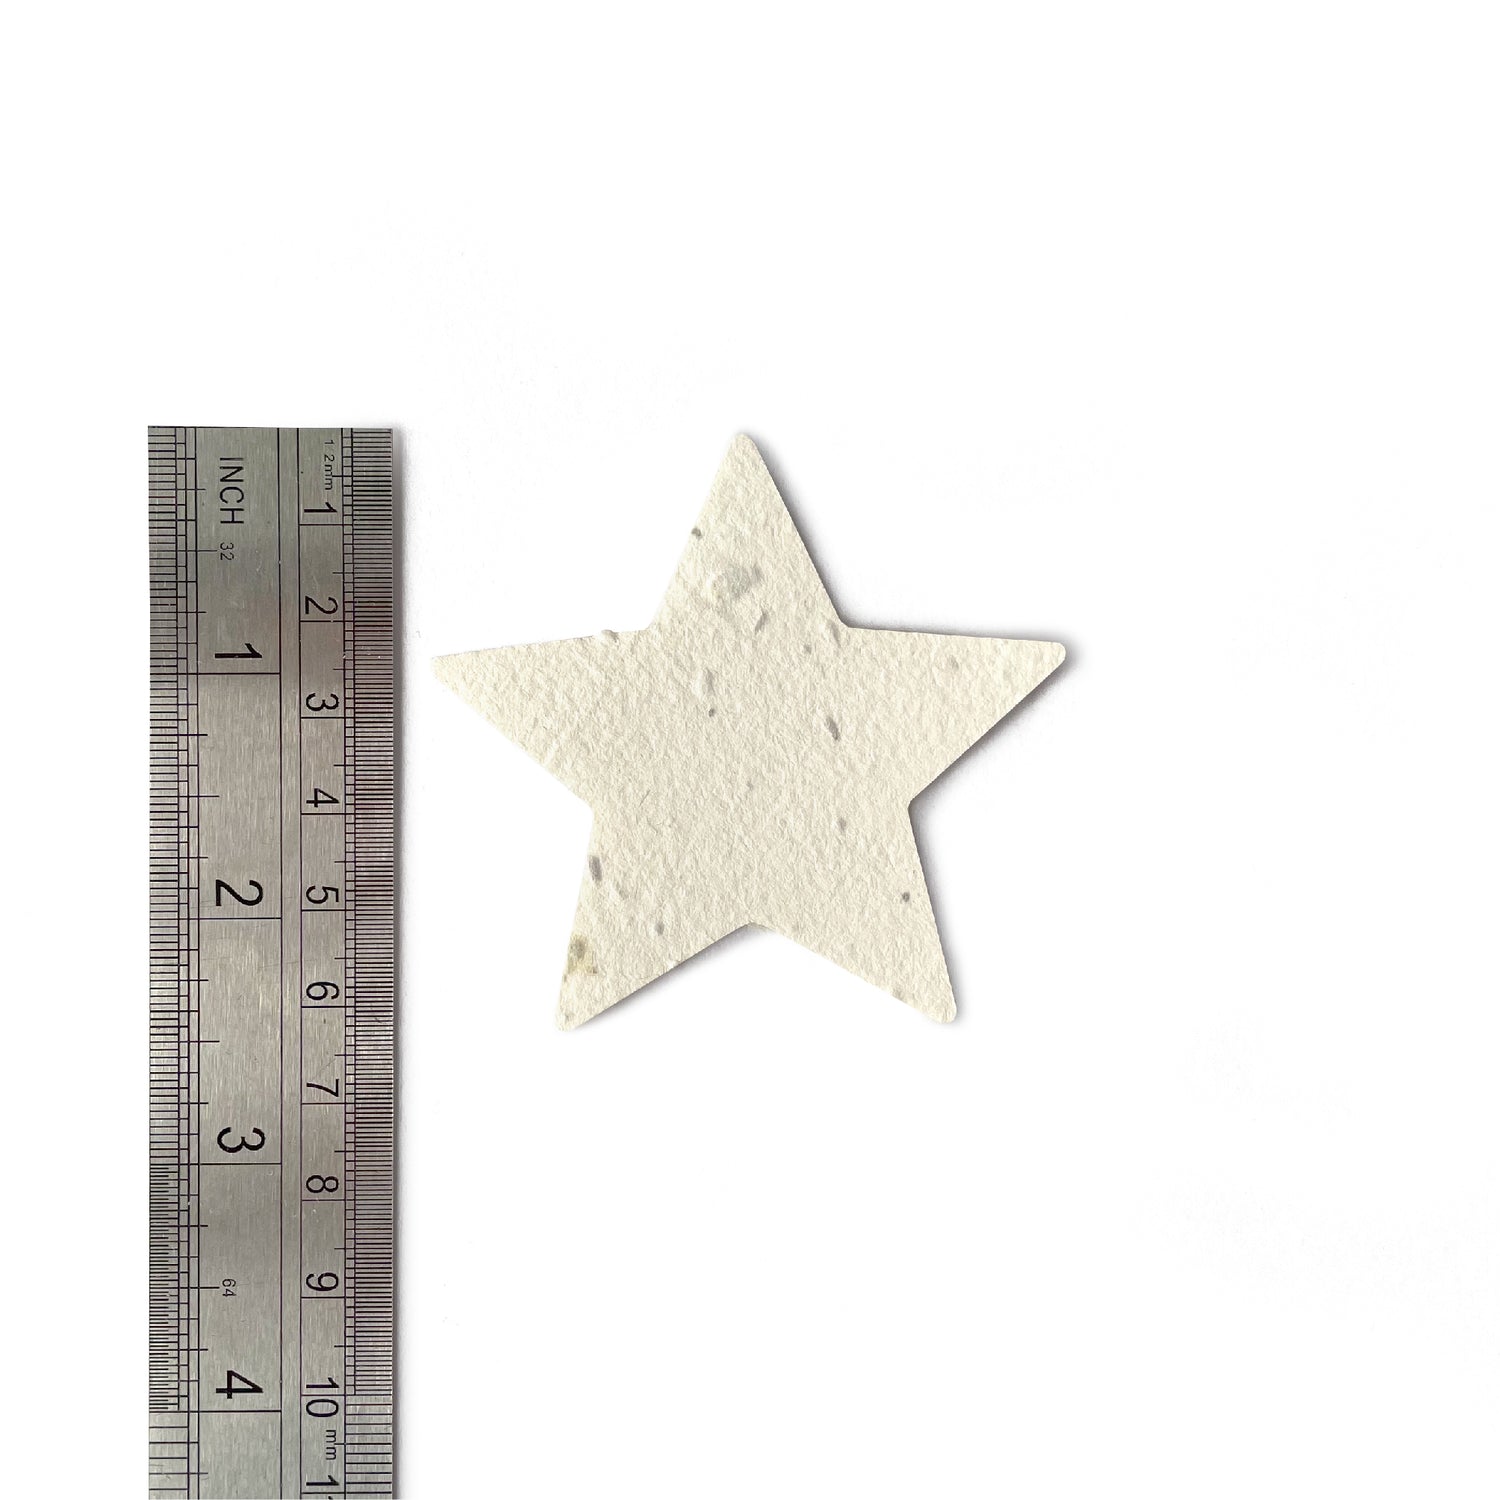 A Ruby &amp; Bo plantable paper star shown on a white background with a metal ruler alongside